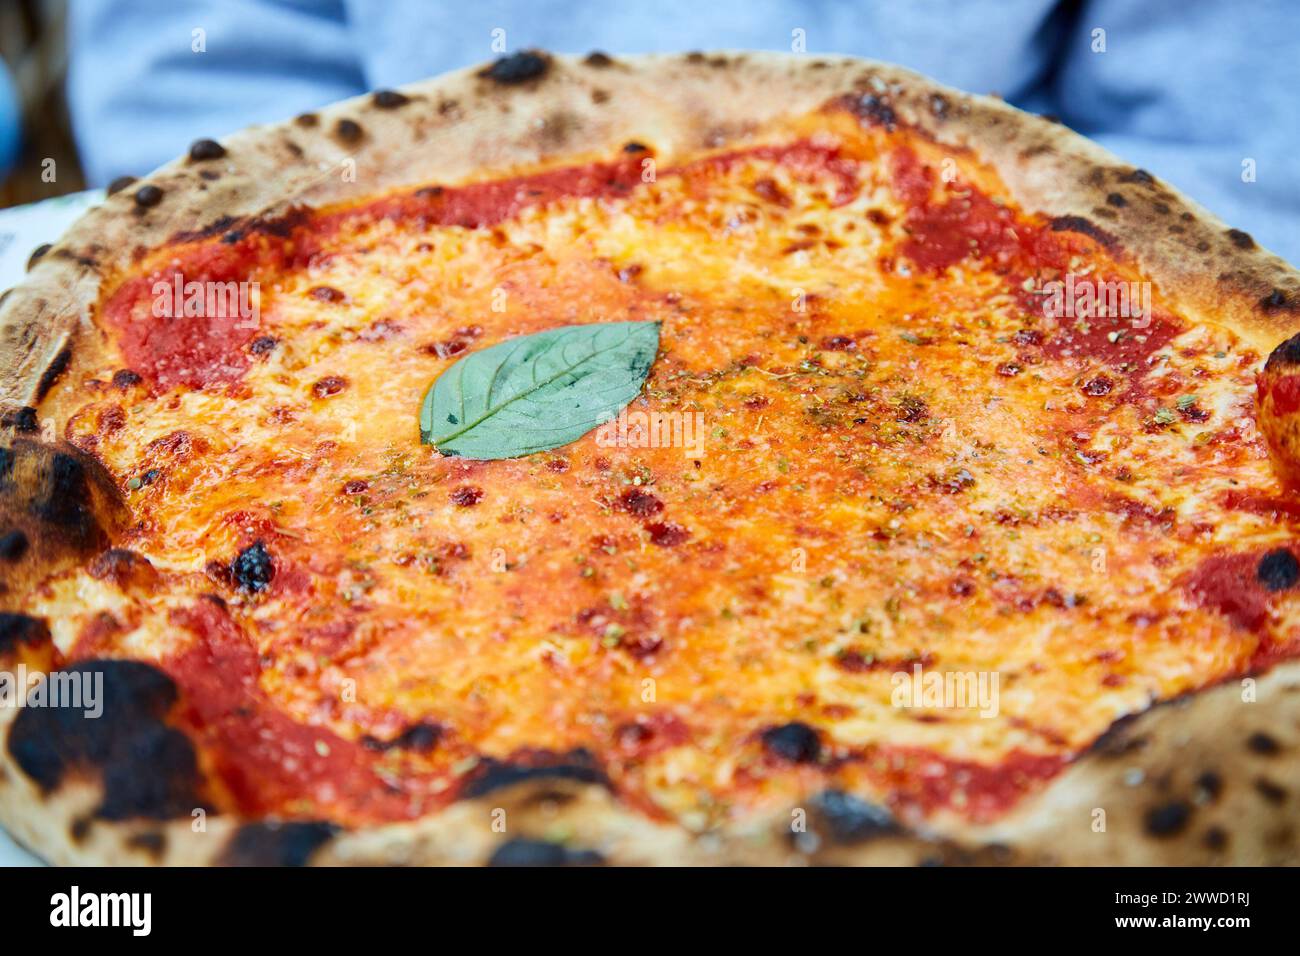 Close Up of Whole Pizza with Basil Leaf Stock Photo